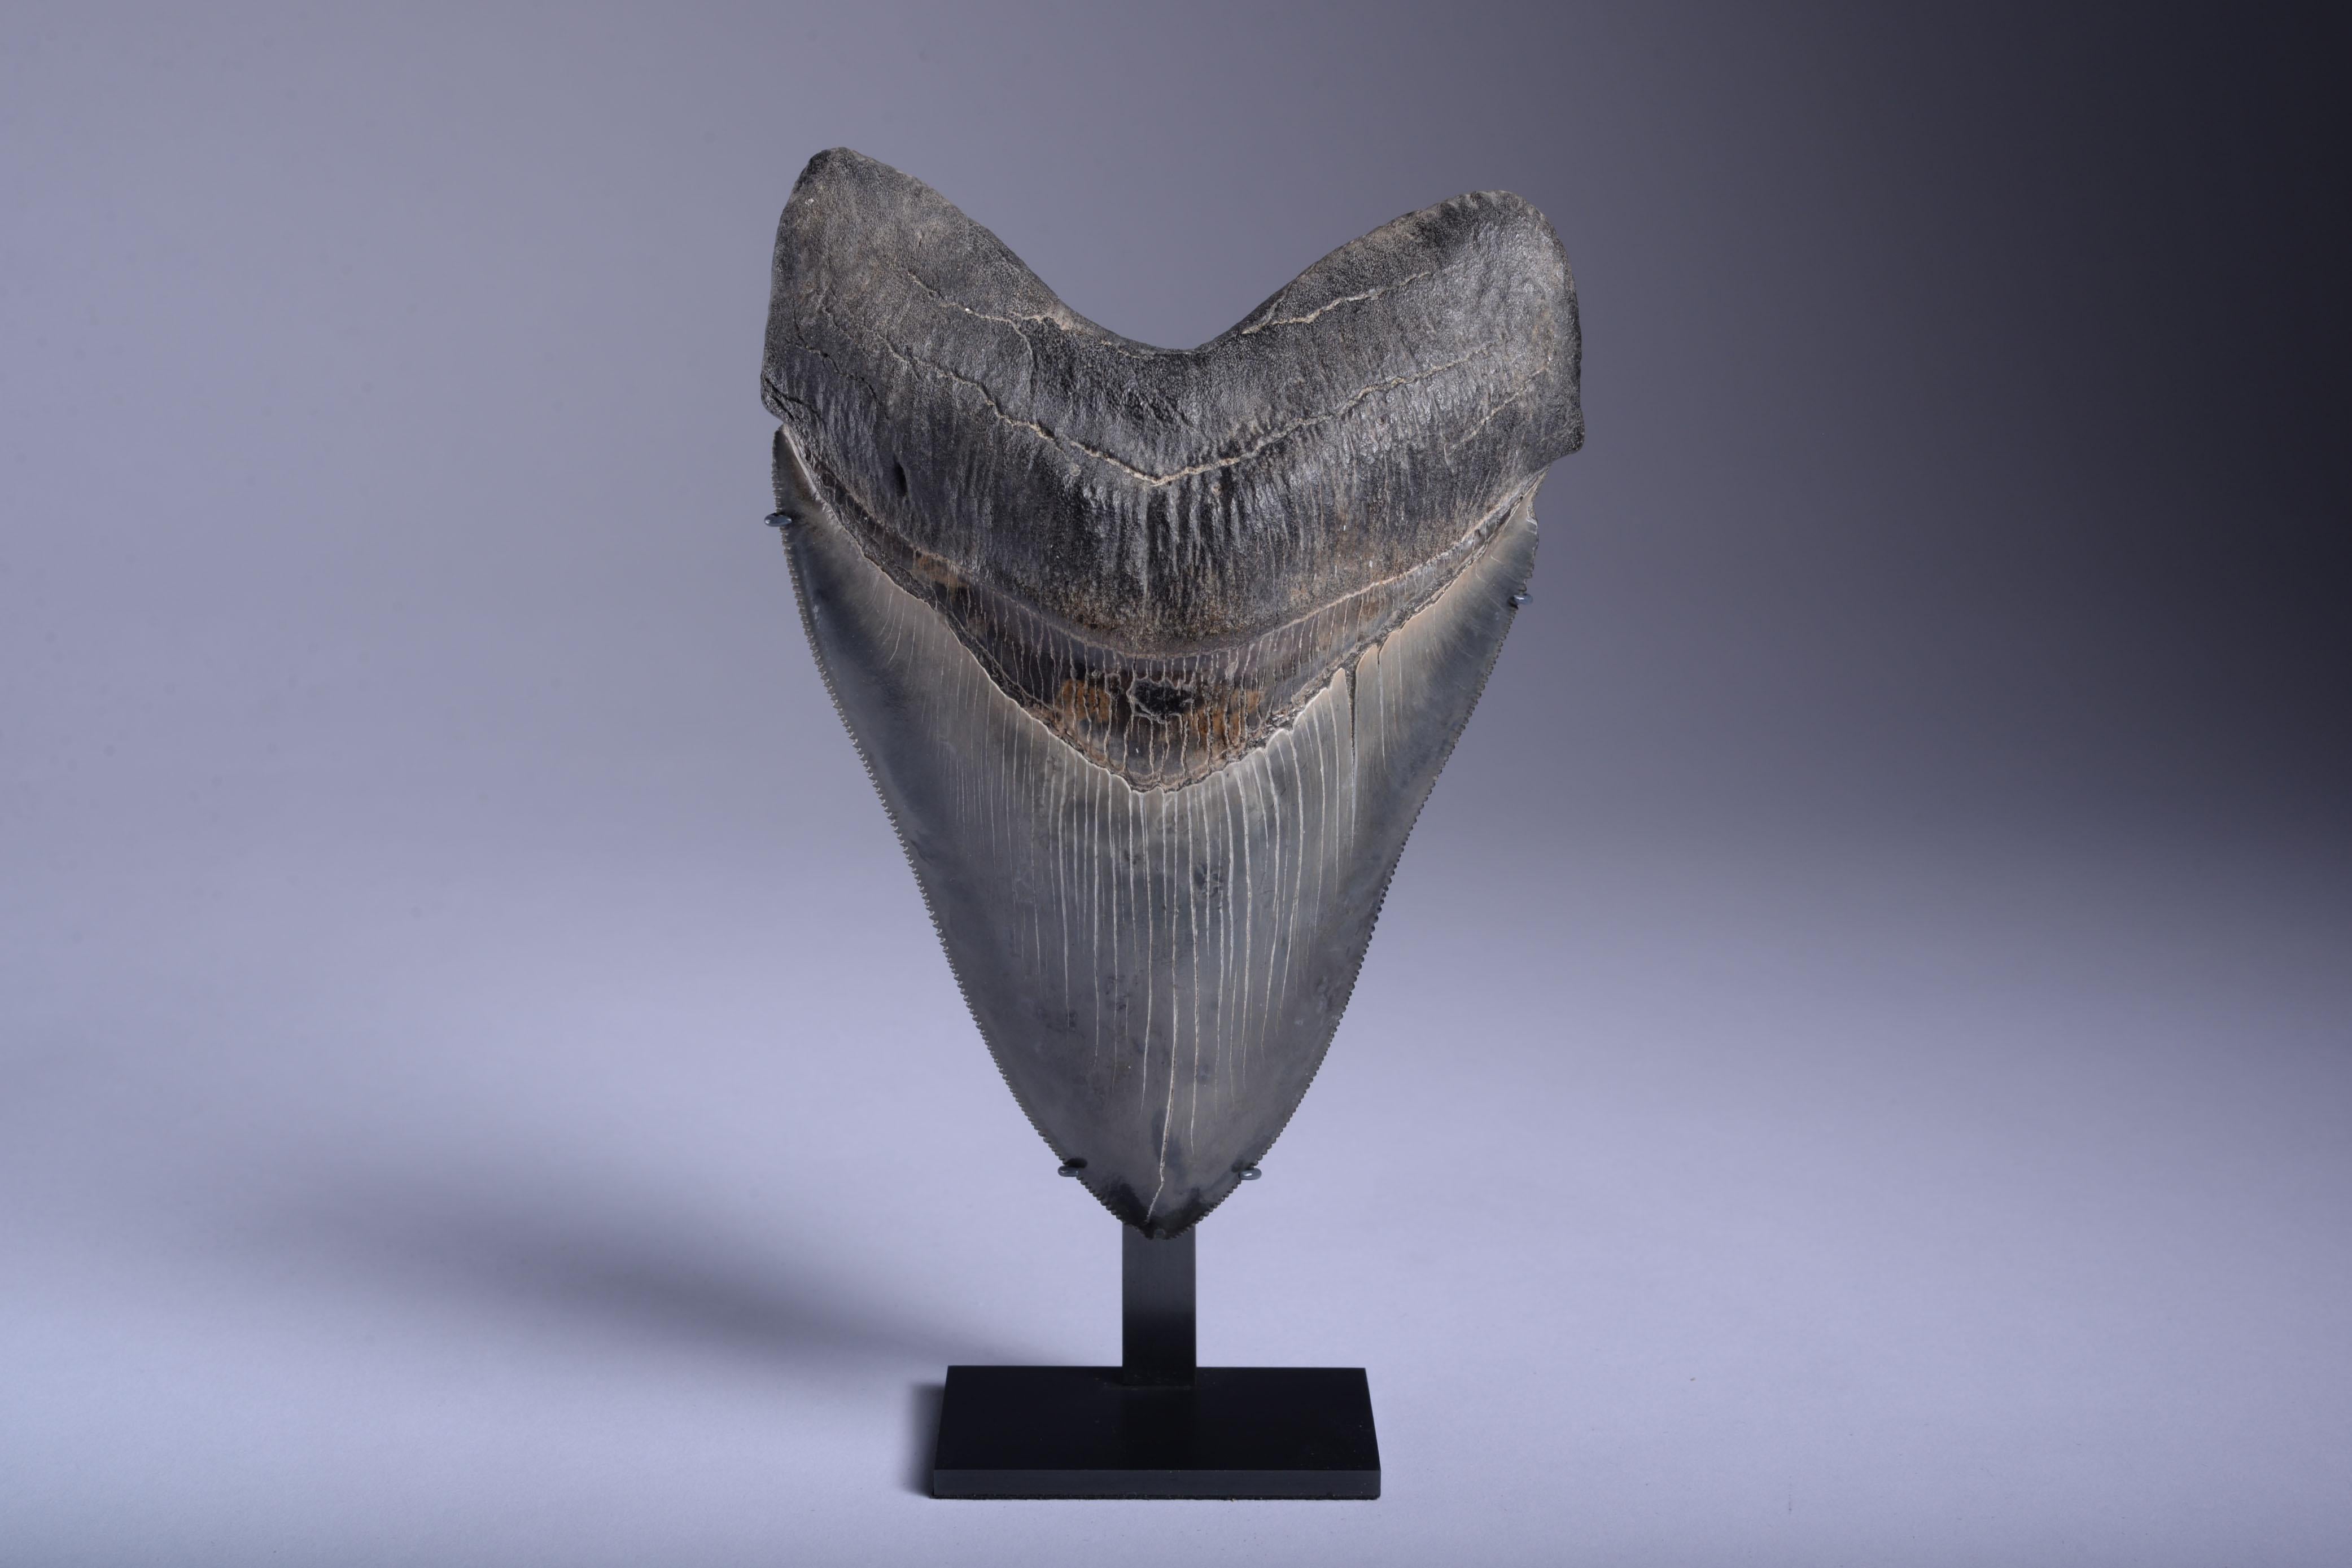 Large megalodon tooth
circa 25-2 Million y/o

This exceedingly large and beautifully preserved serrated tooth would have once lined the mouth of a Megalodon shark (Carcharocles megalodon) - the size, at 5 1/2 inches, is impressive, and indicates